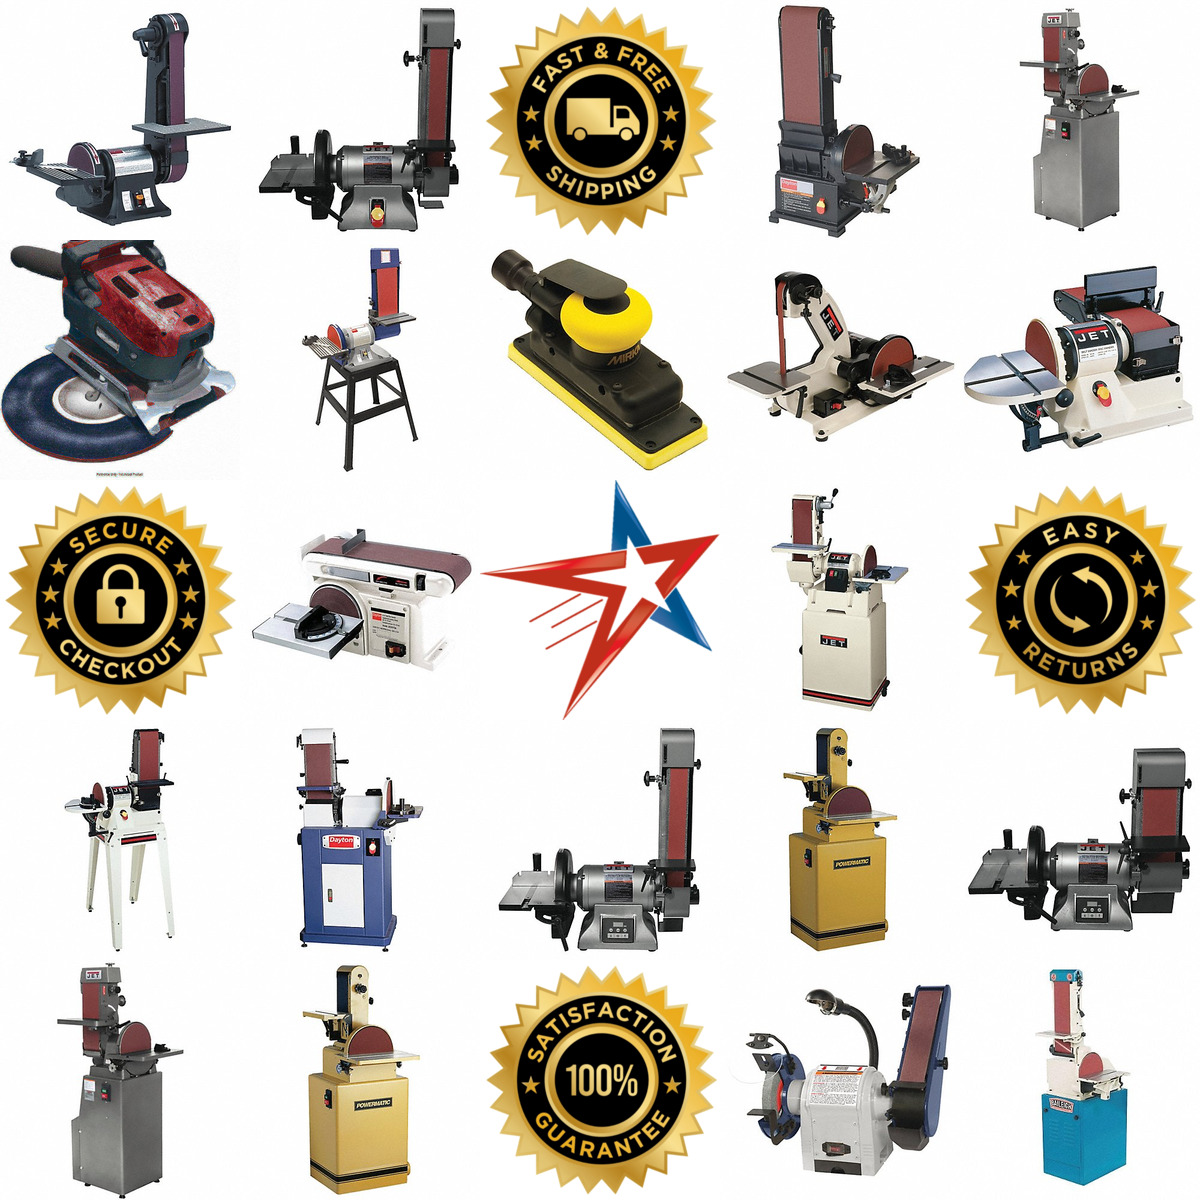 A selection of Corded Combination Sanding and Grinding Machines products on GoVets